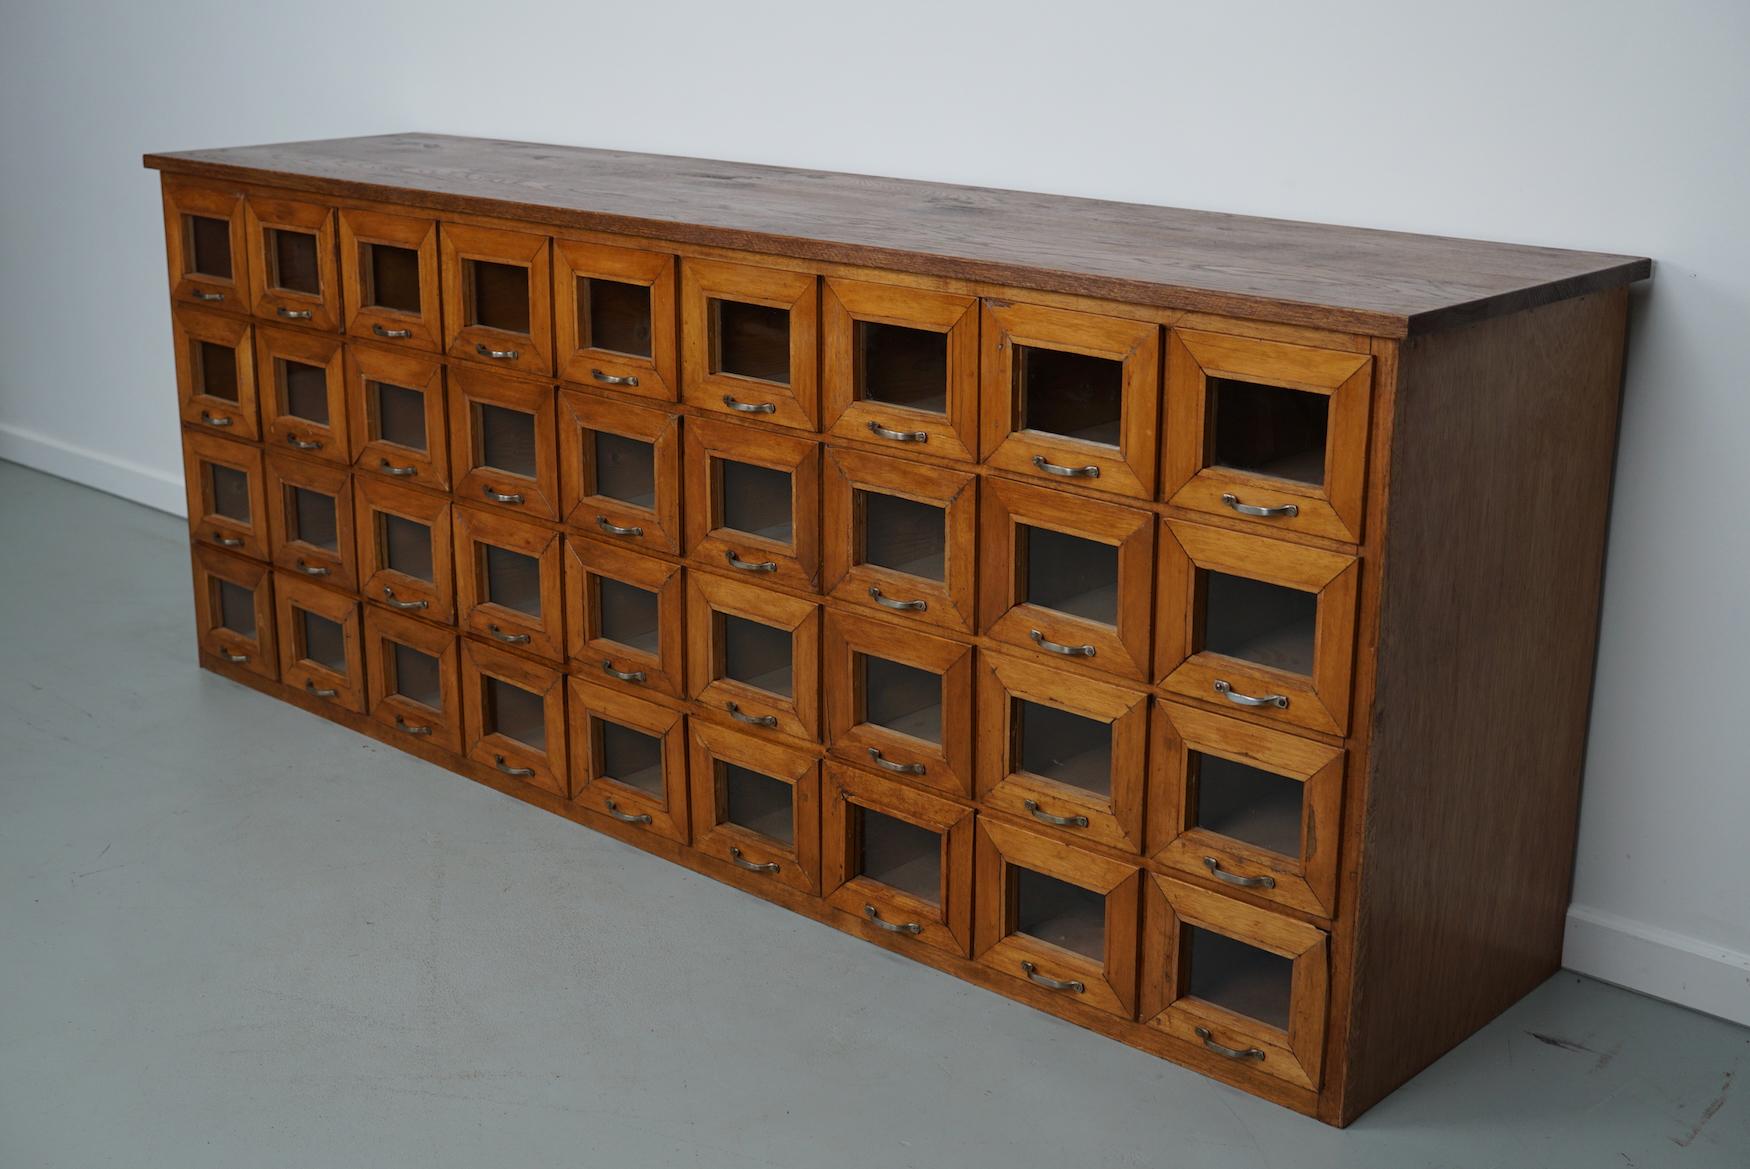 This haberdashery cabinet was produced during the 1950s in the Netherlands. It features 36 drawers in oak with glass fronts and metal handles. It was originally used in a warehouse for plant seeds in the city of Delft. The interior dimensions of the